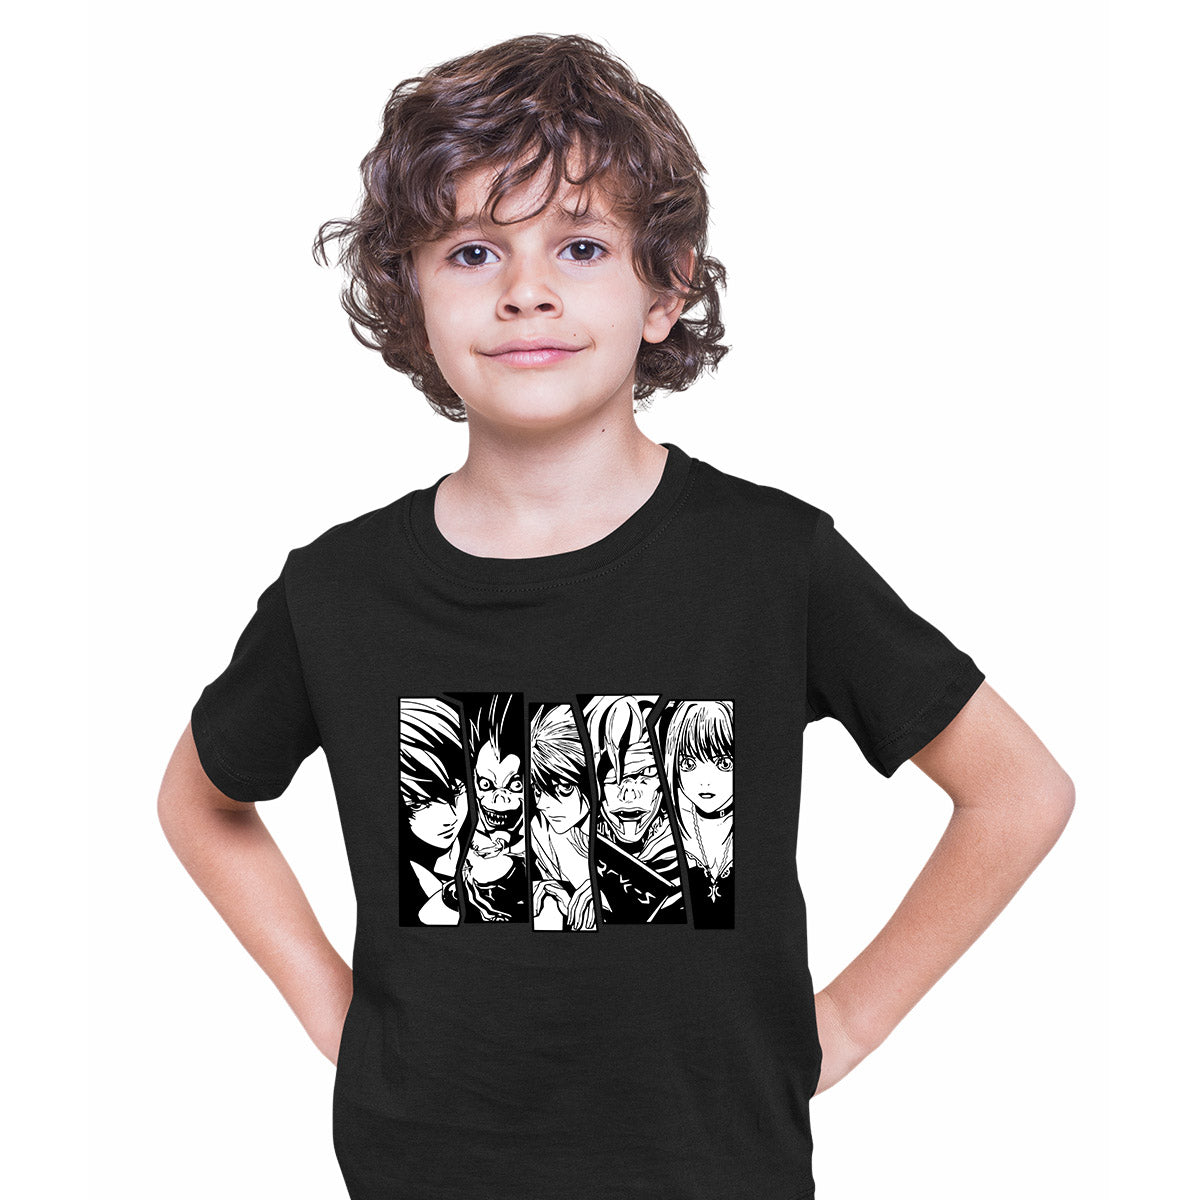 Death Note Characters Japanese Anime Manga Black T-shirt for Kids